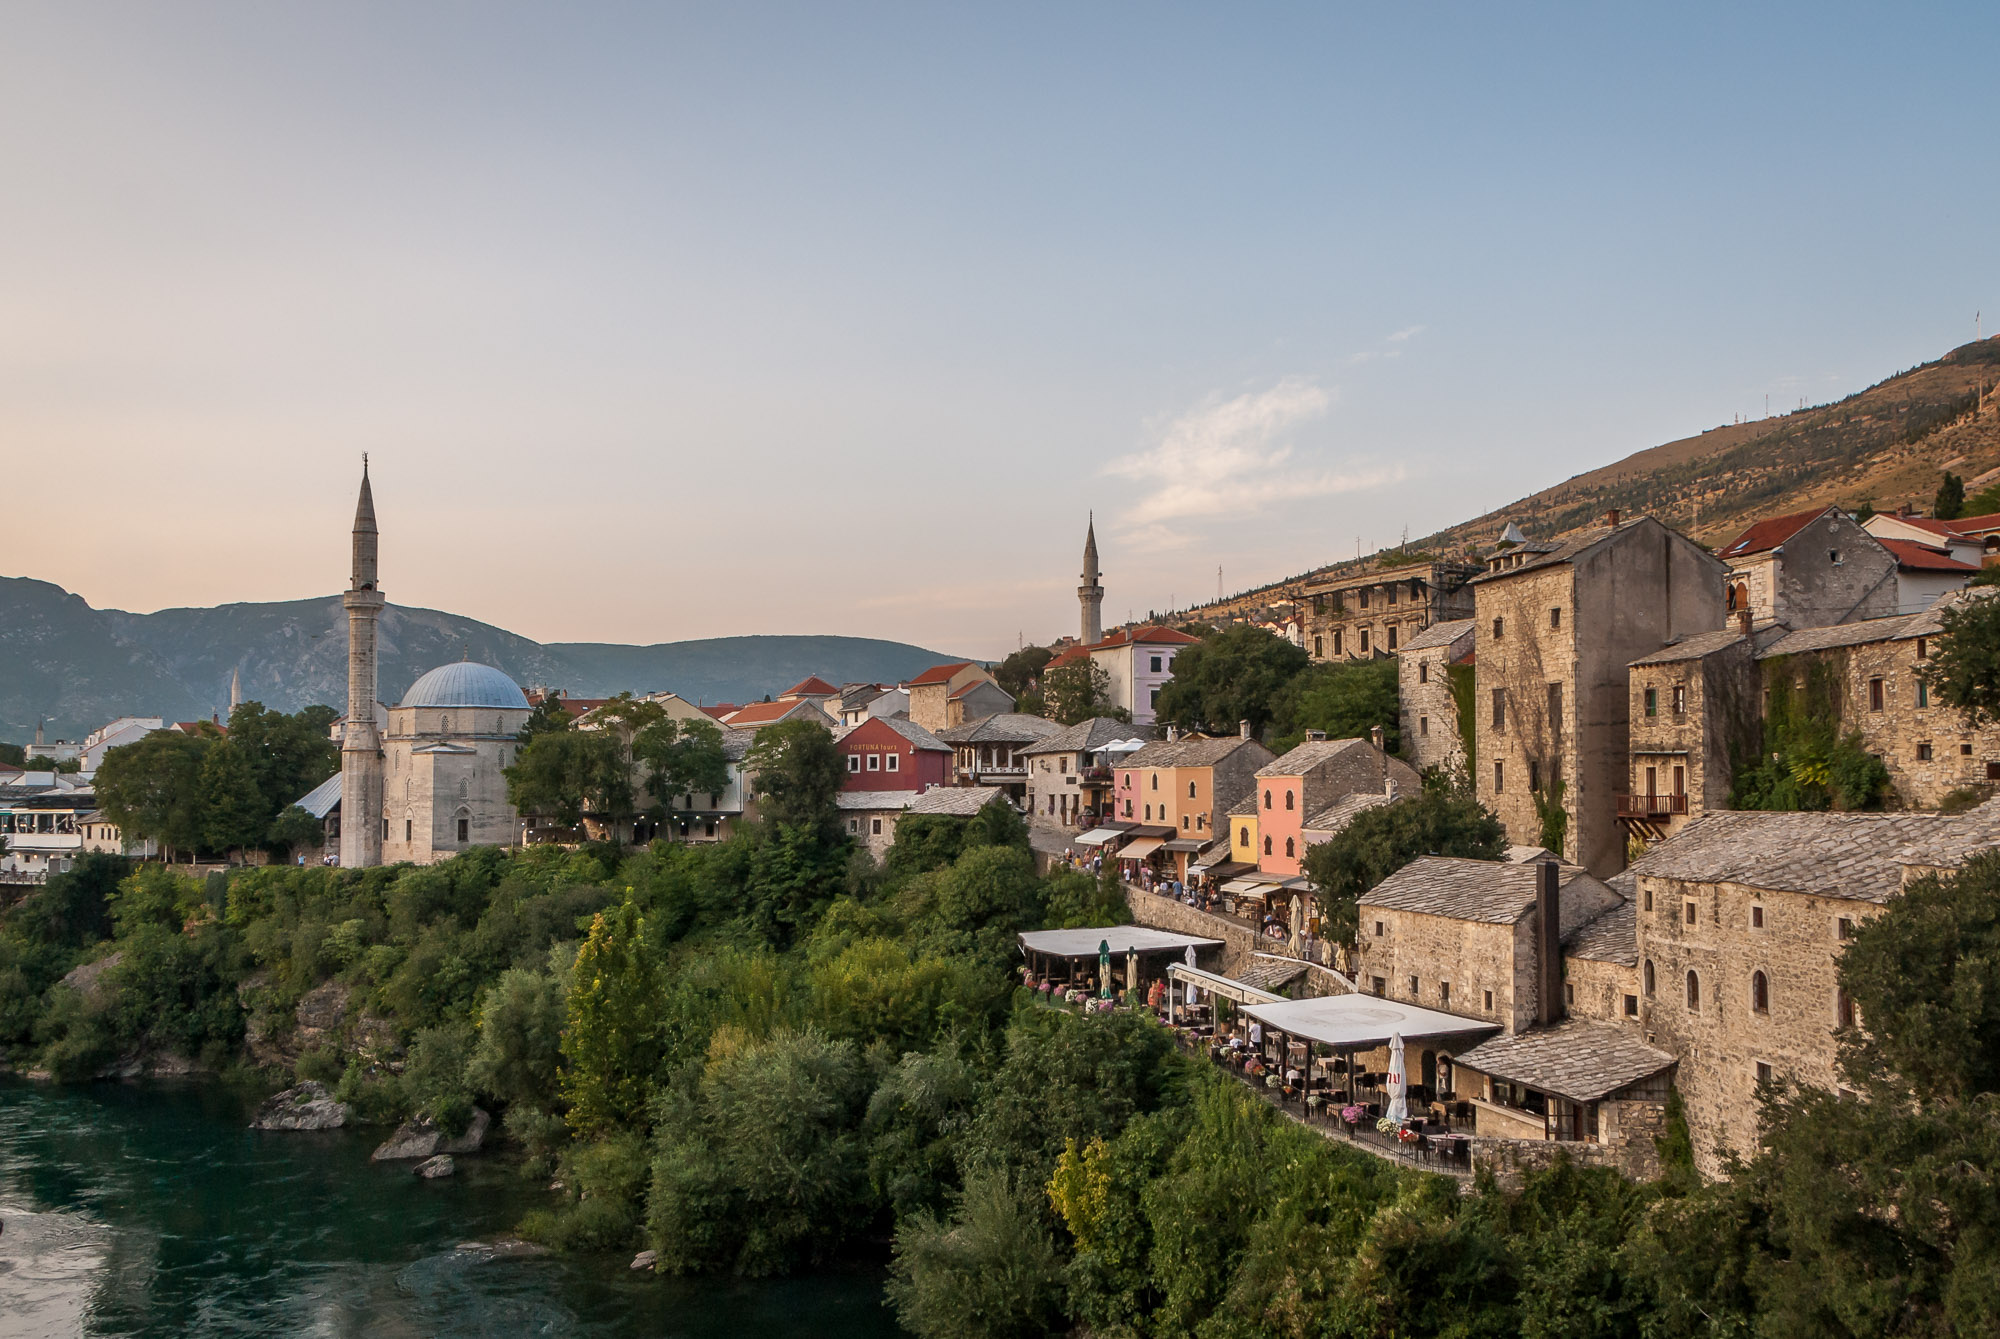 Mostar Old Town